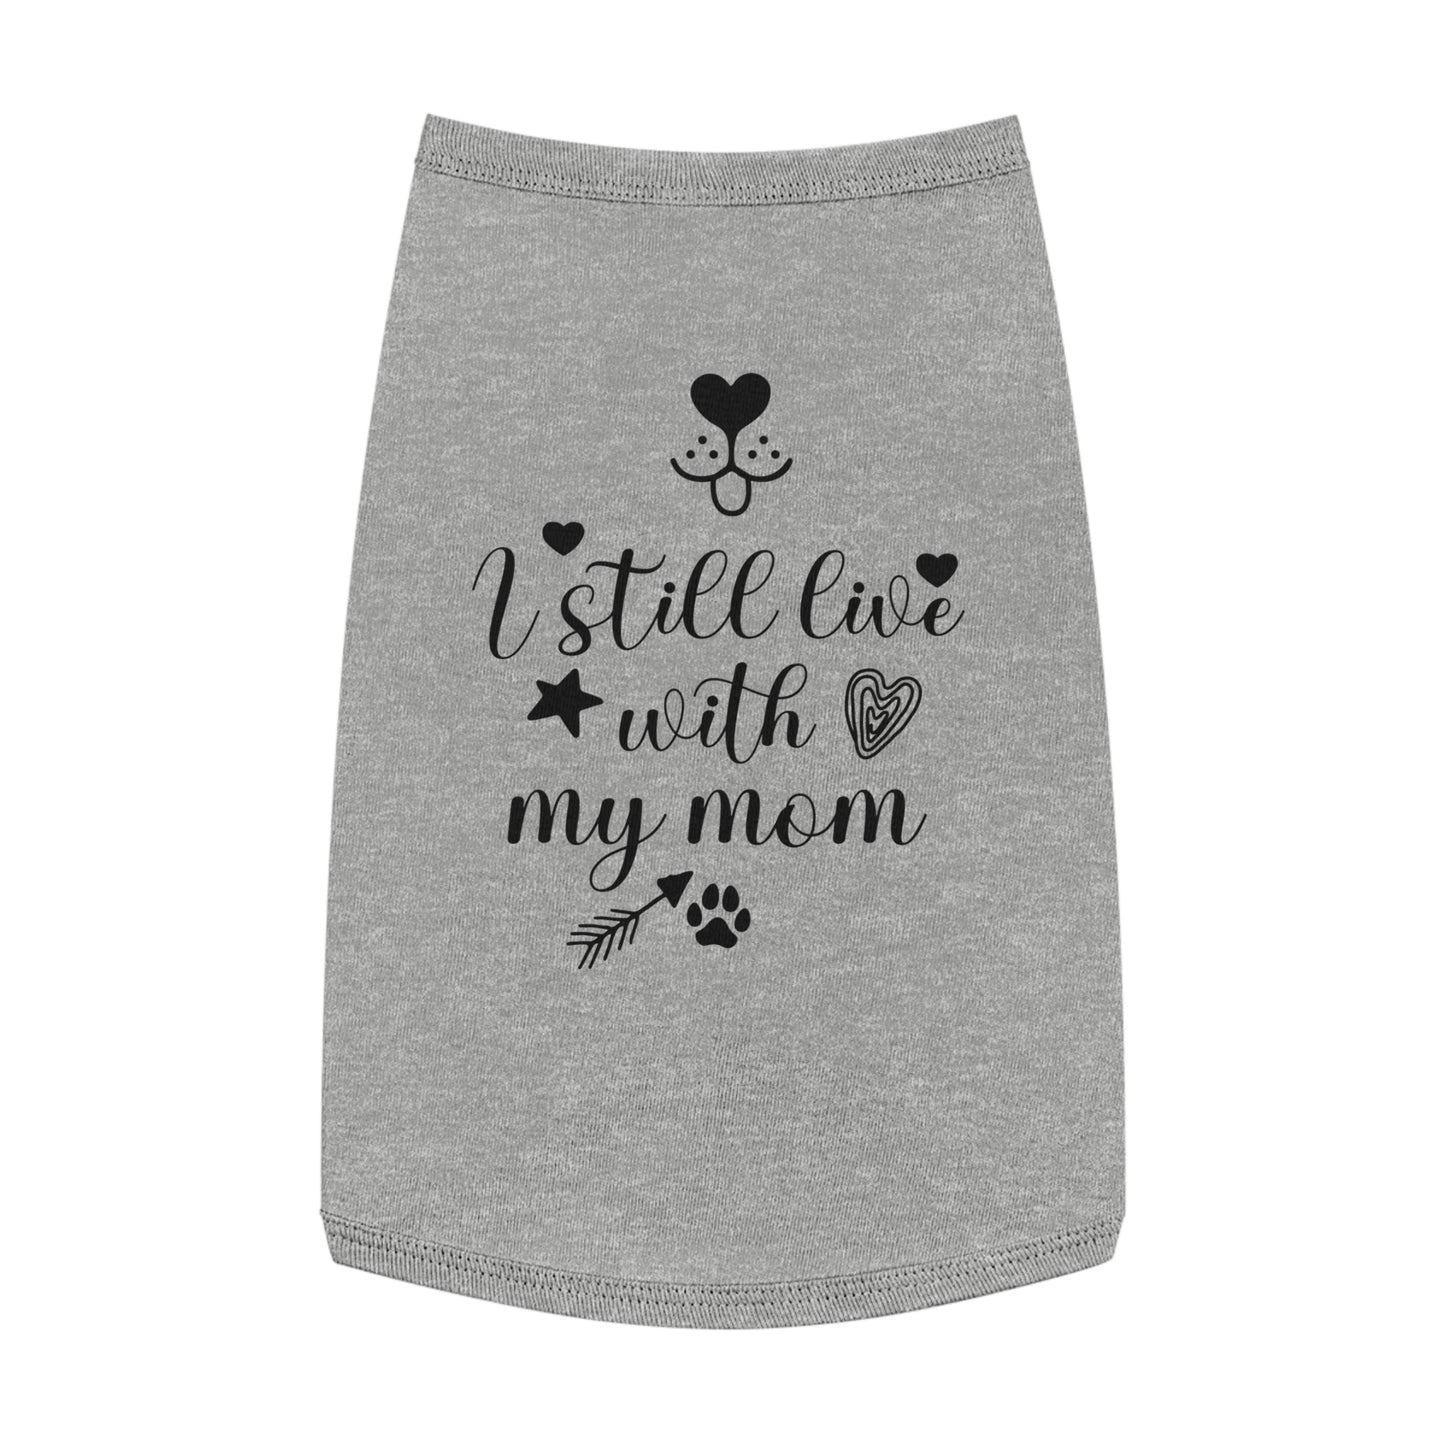 I still live with my mom Dog Pet Tank Top Cute Pet Clothes